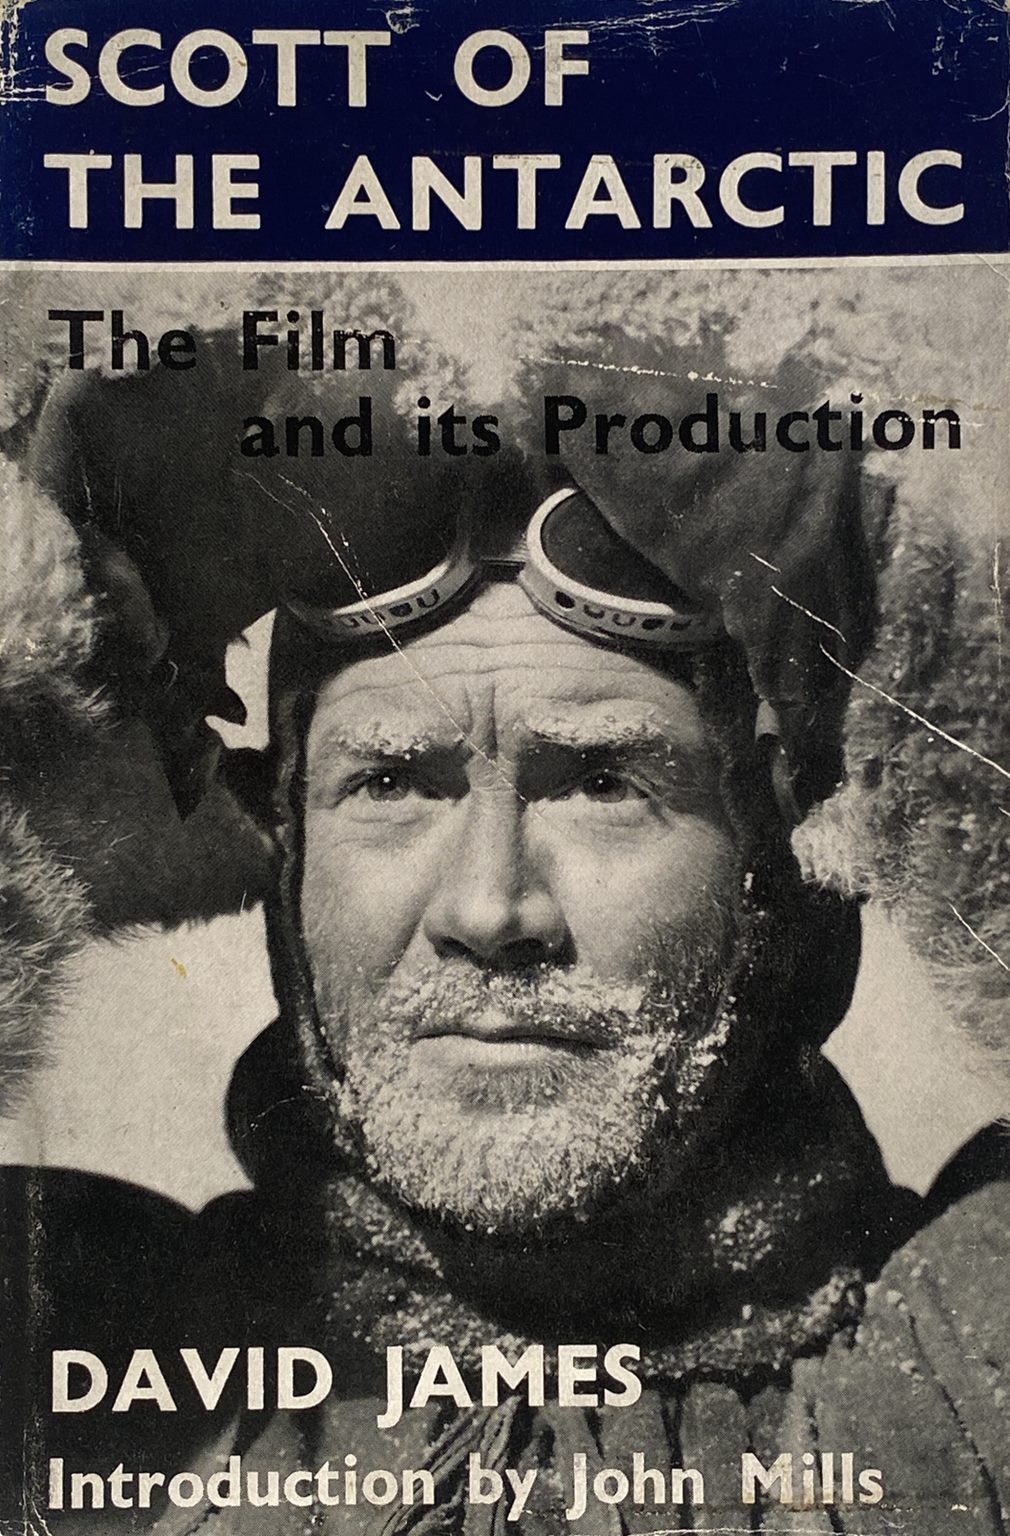 SCOTT OF THE ANTARCTIC: The Film and its Production